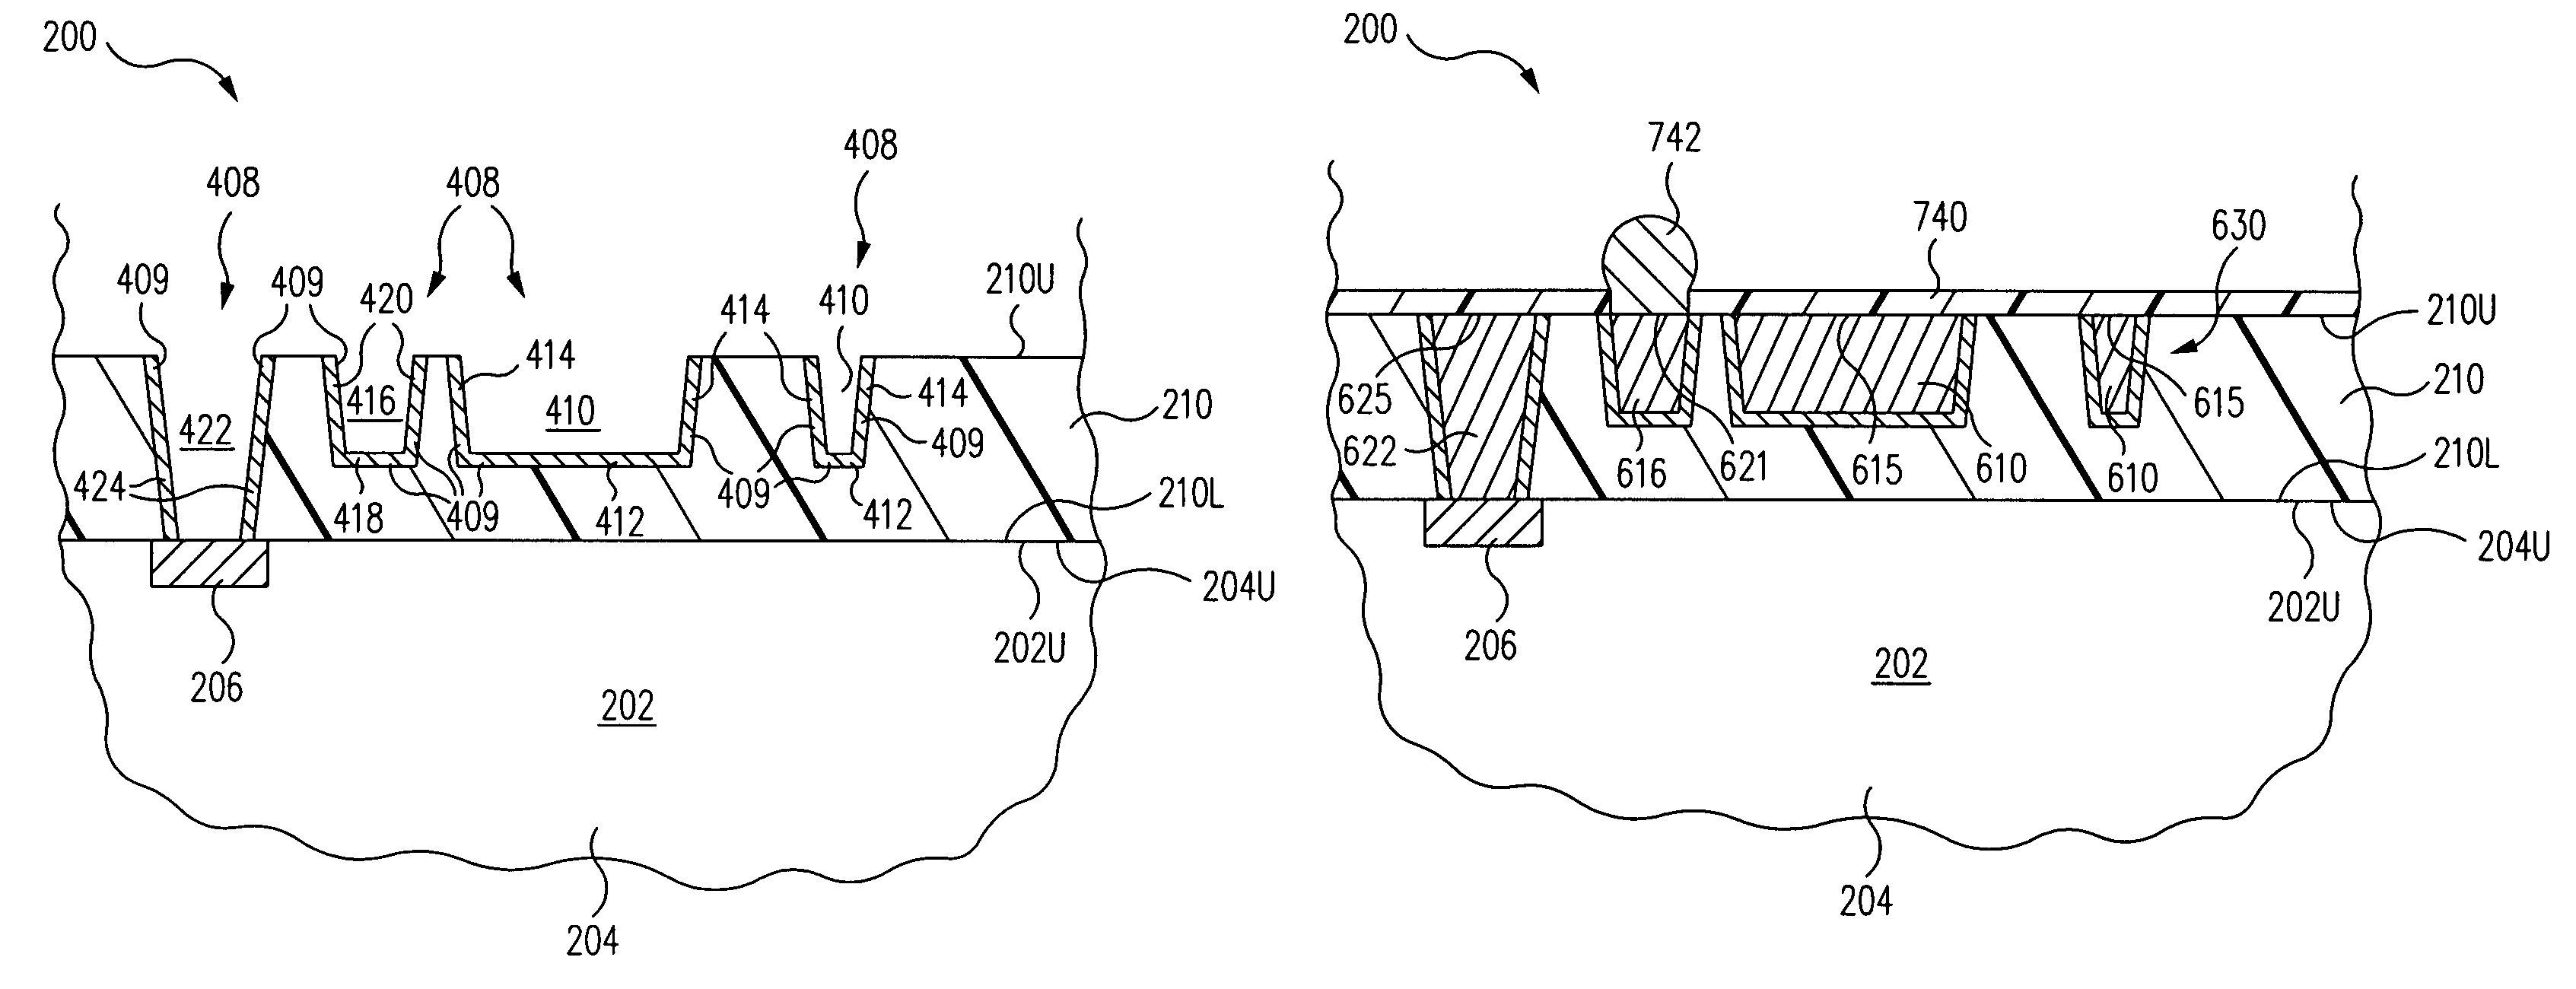 Wafer level package utilizing laser-activated dielectric material